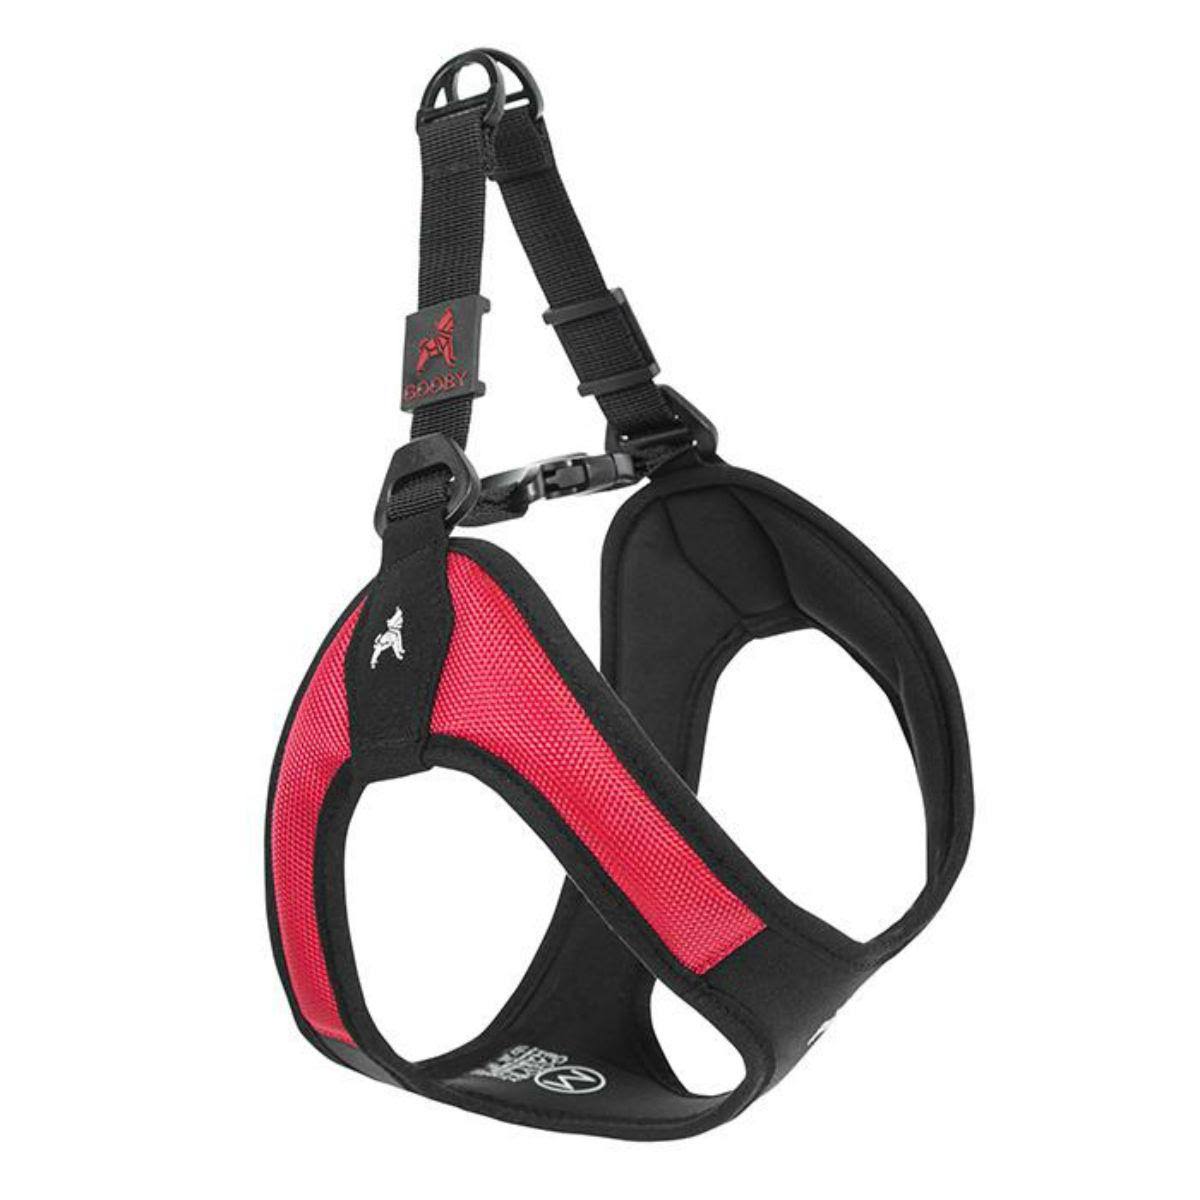 Gooby Escape Proof [ESCAPE Free] Easy Fit Dog Harness for Dogs That Likes to Escape Their Harnesses, Red, Small